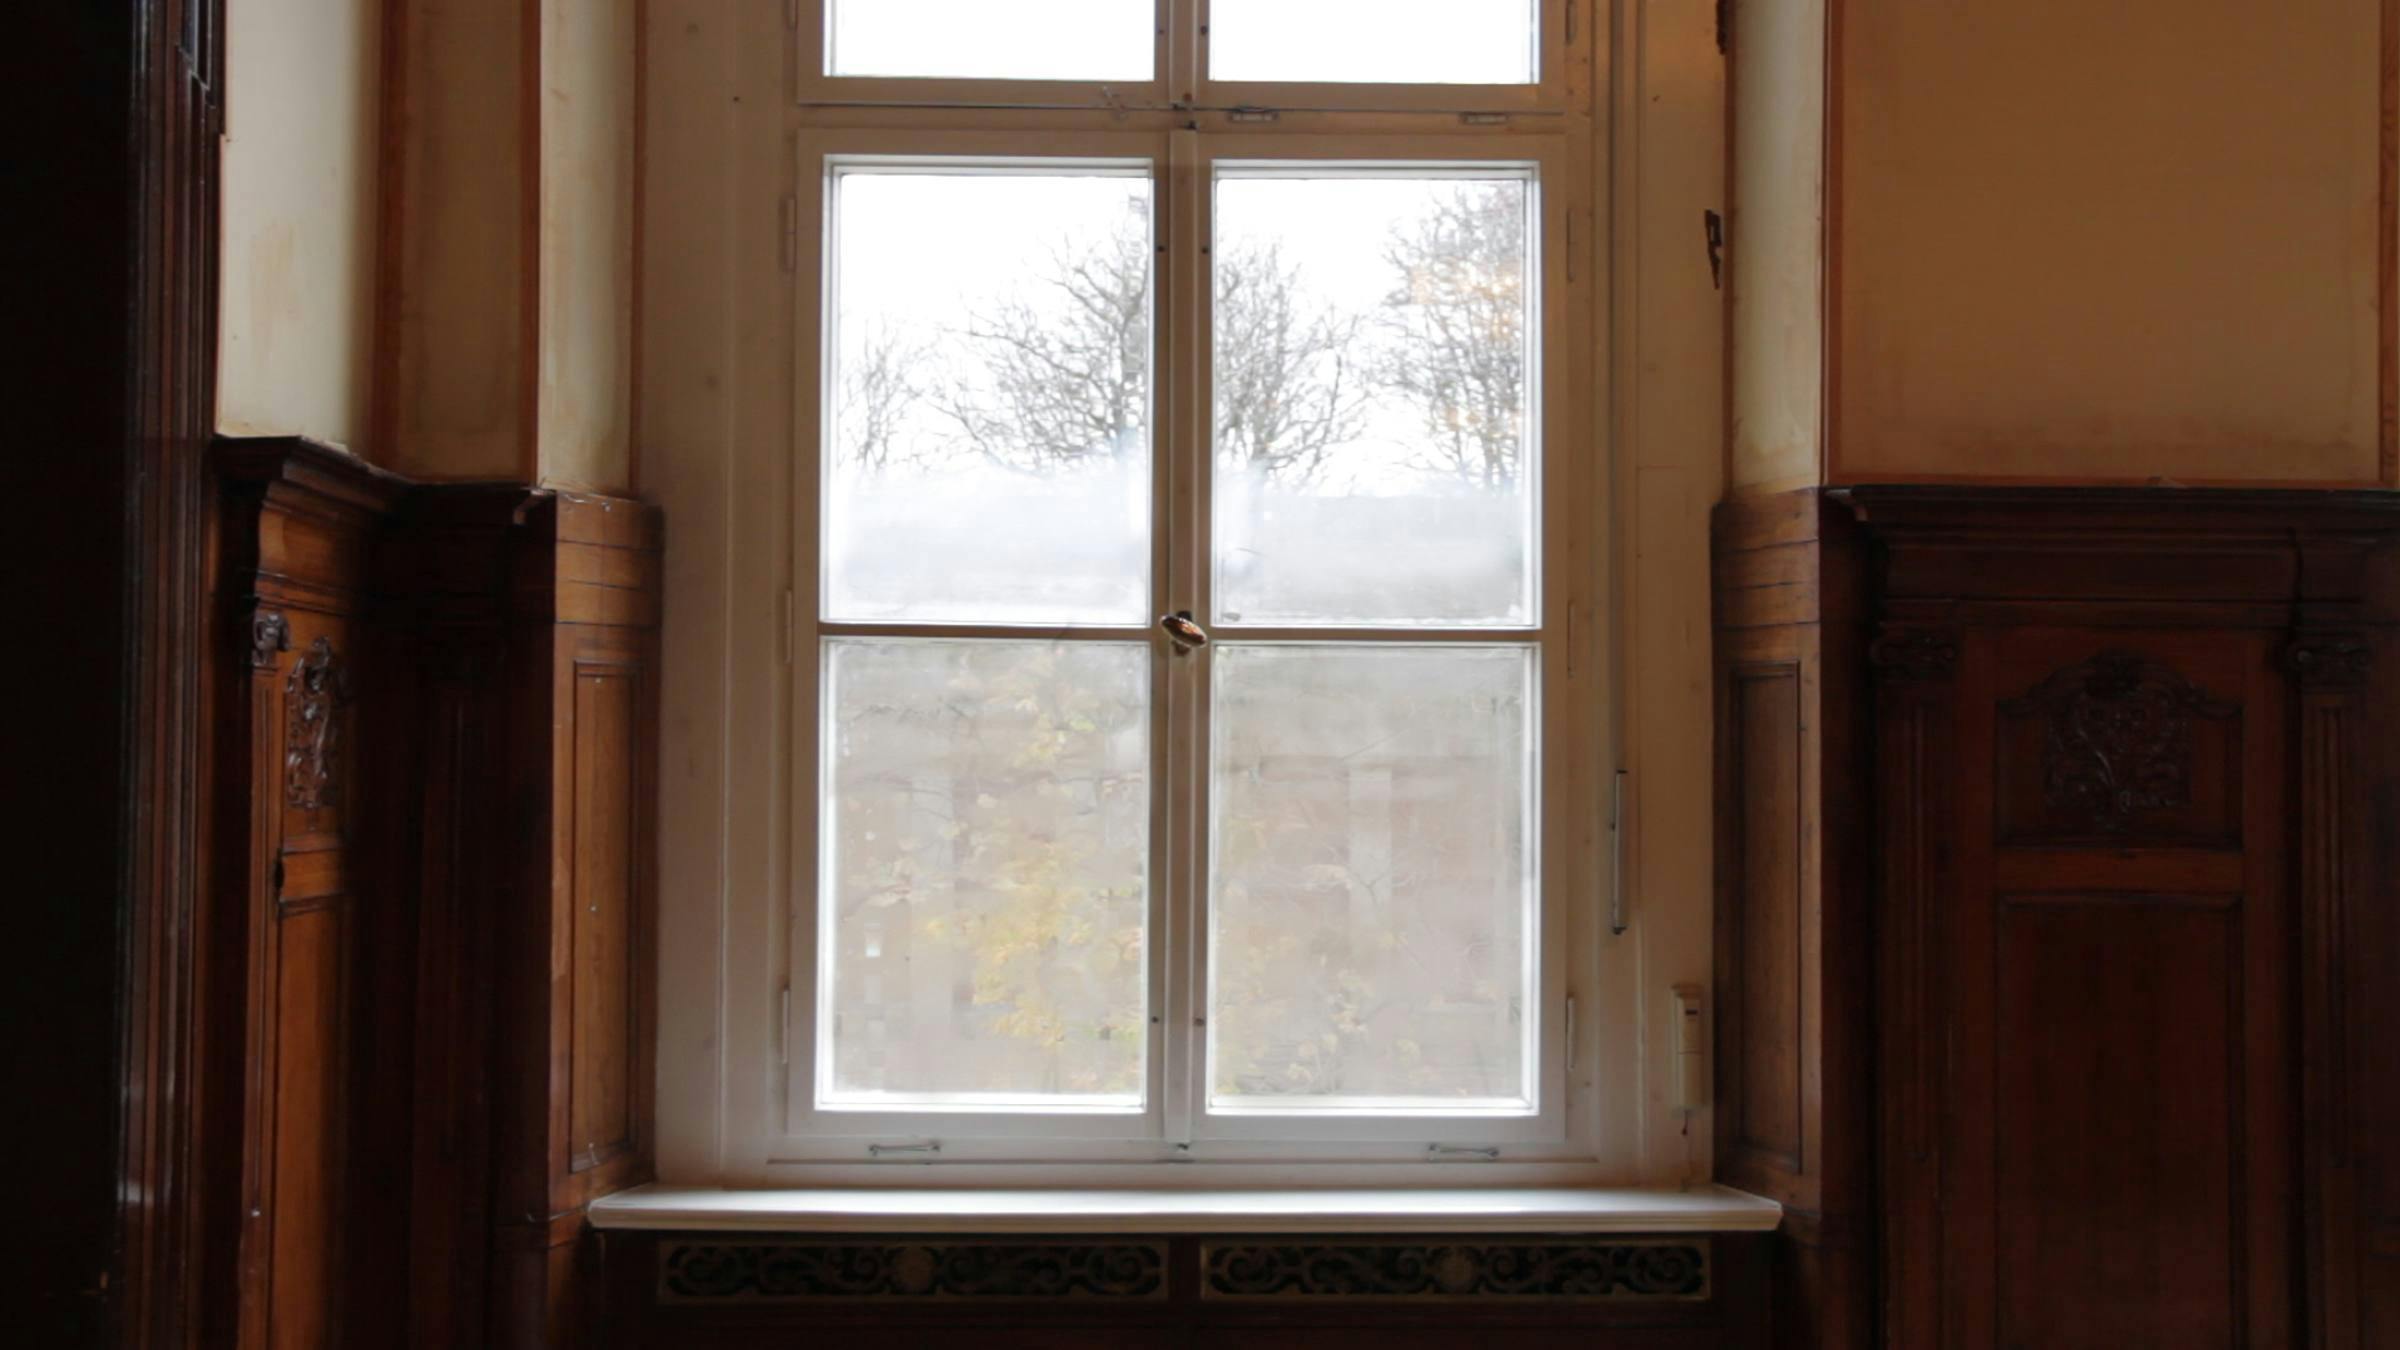 an image of a window covered in condensation